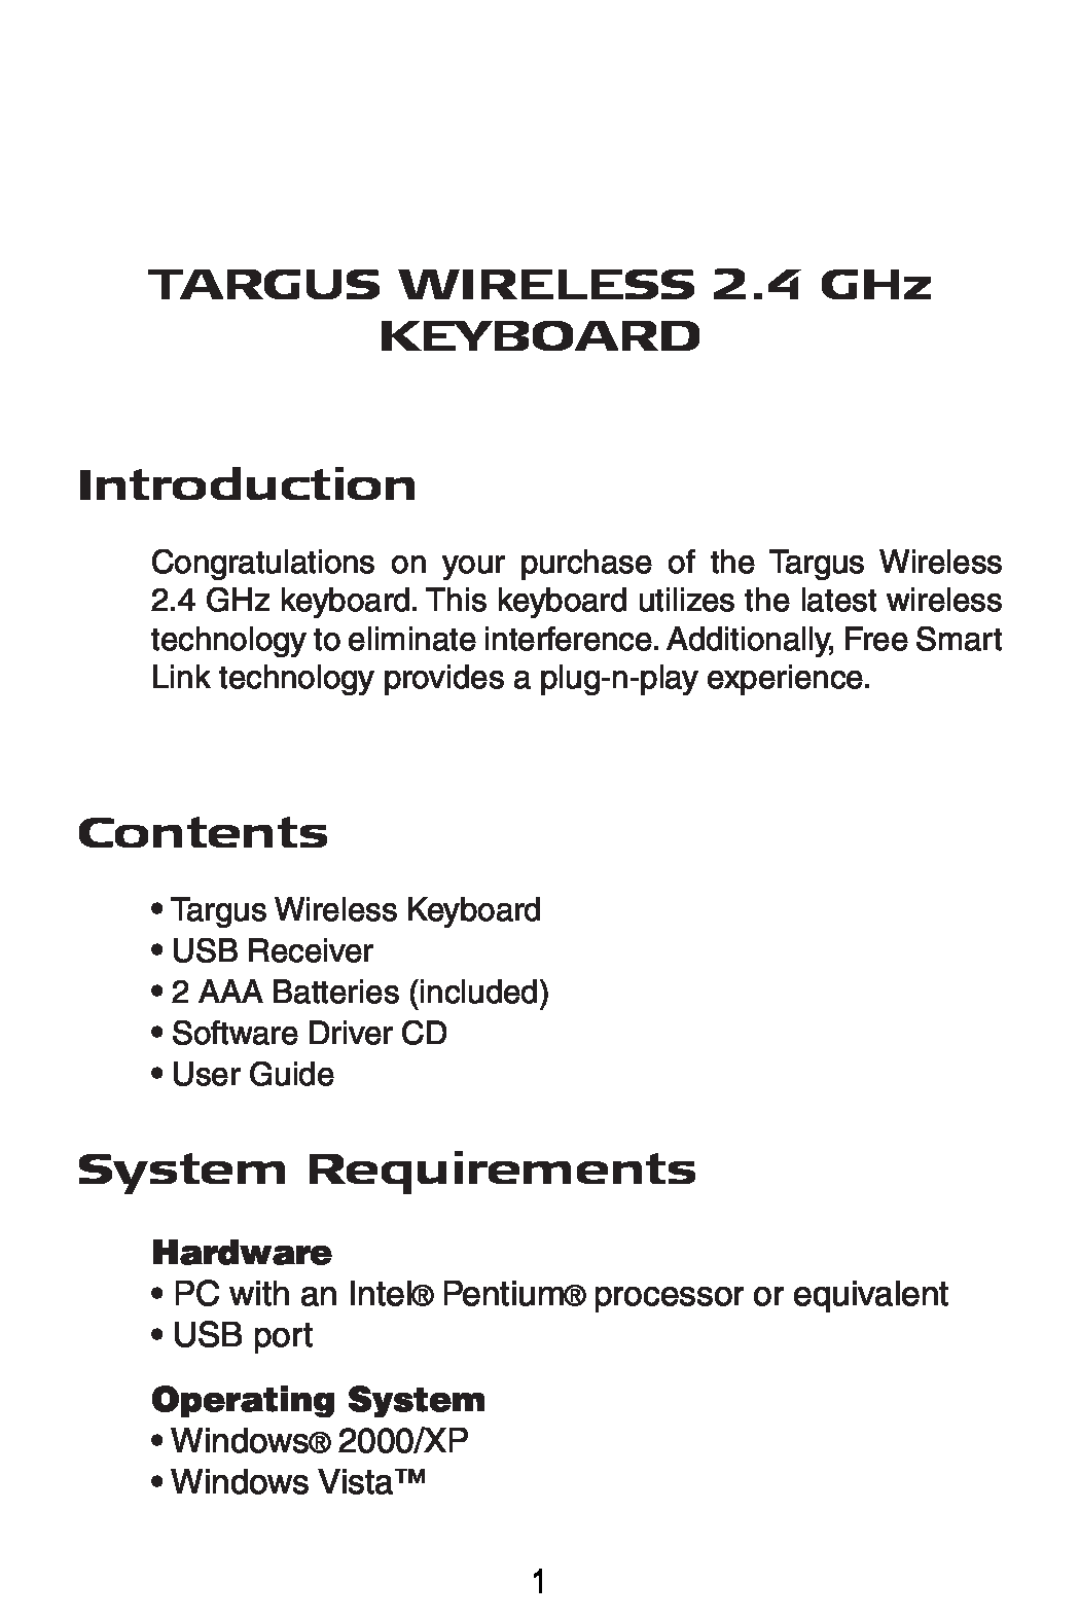 Targus AKB24US TARGUS WIRELESS 2.4 GHz KEYBOARD Introduction, Contents, System Requirements, Hardware, Operating System 